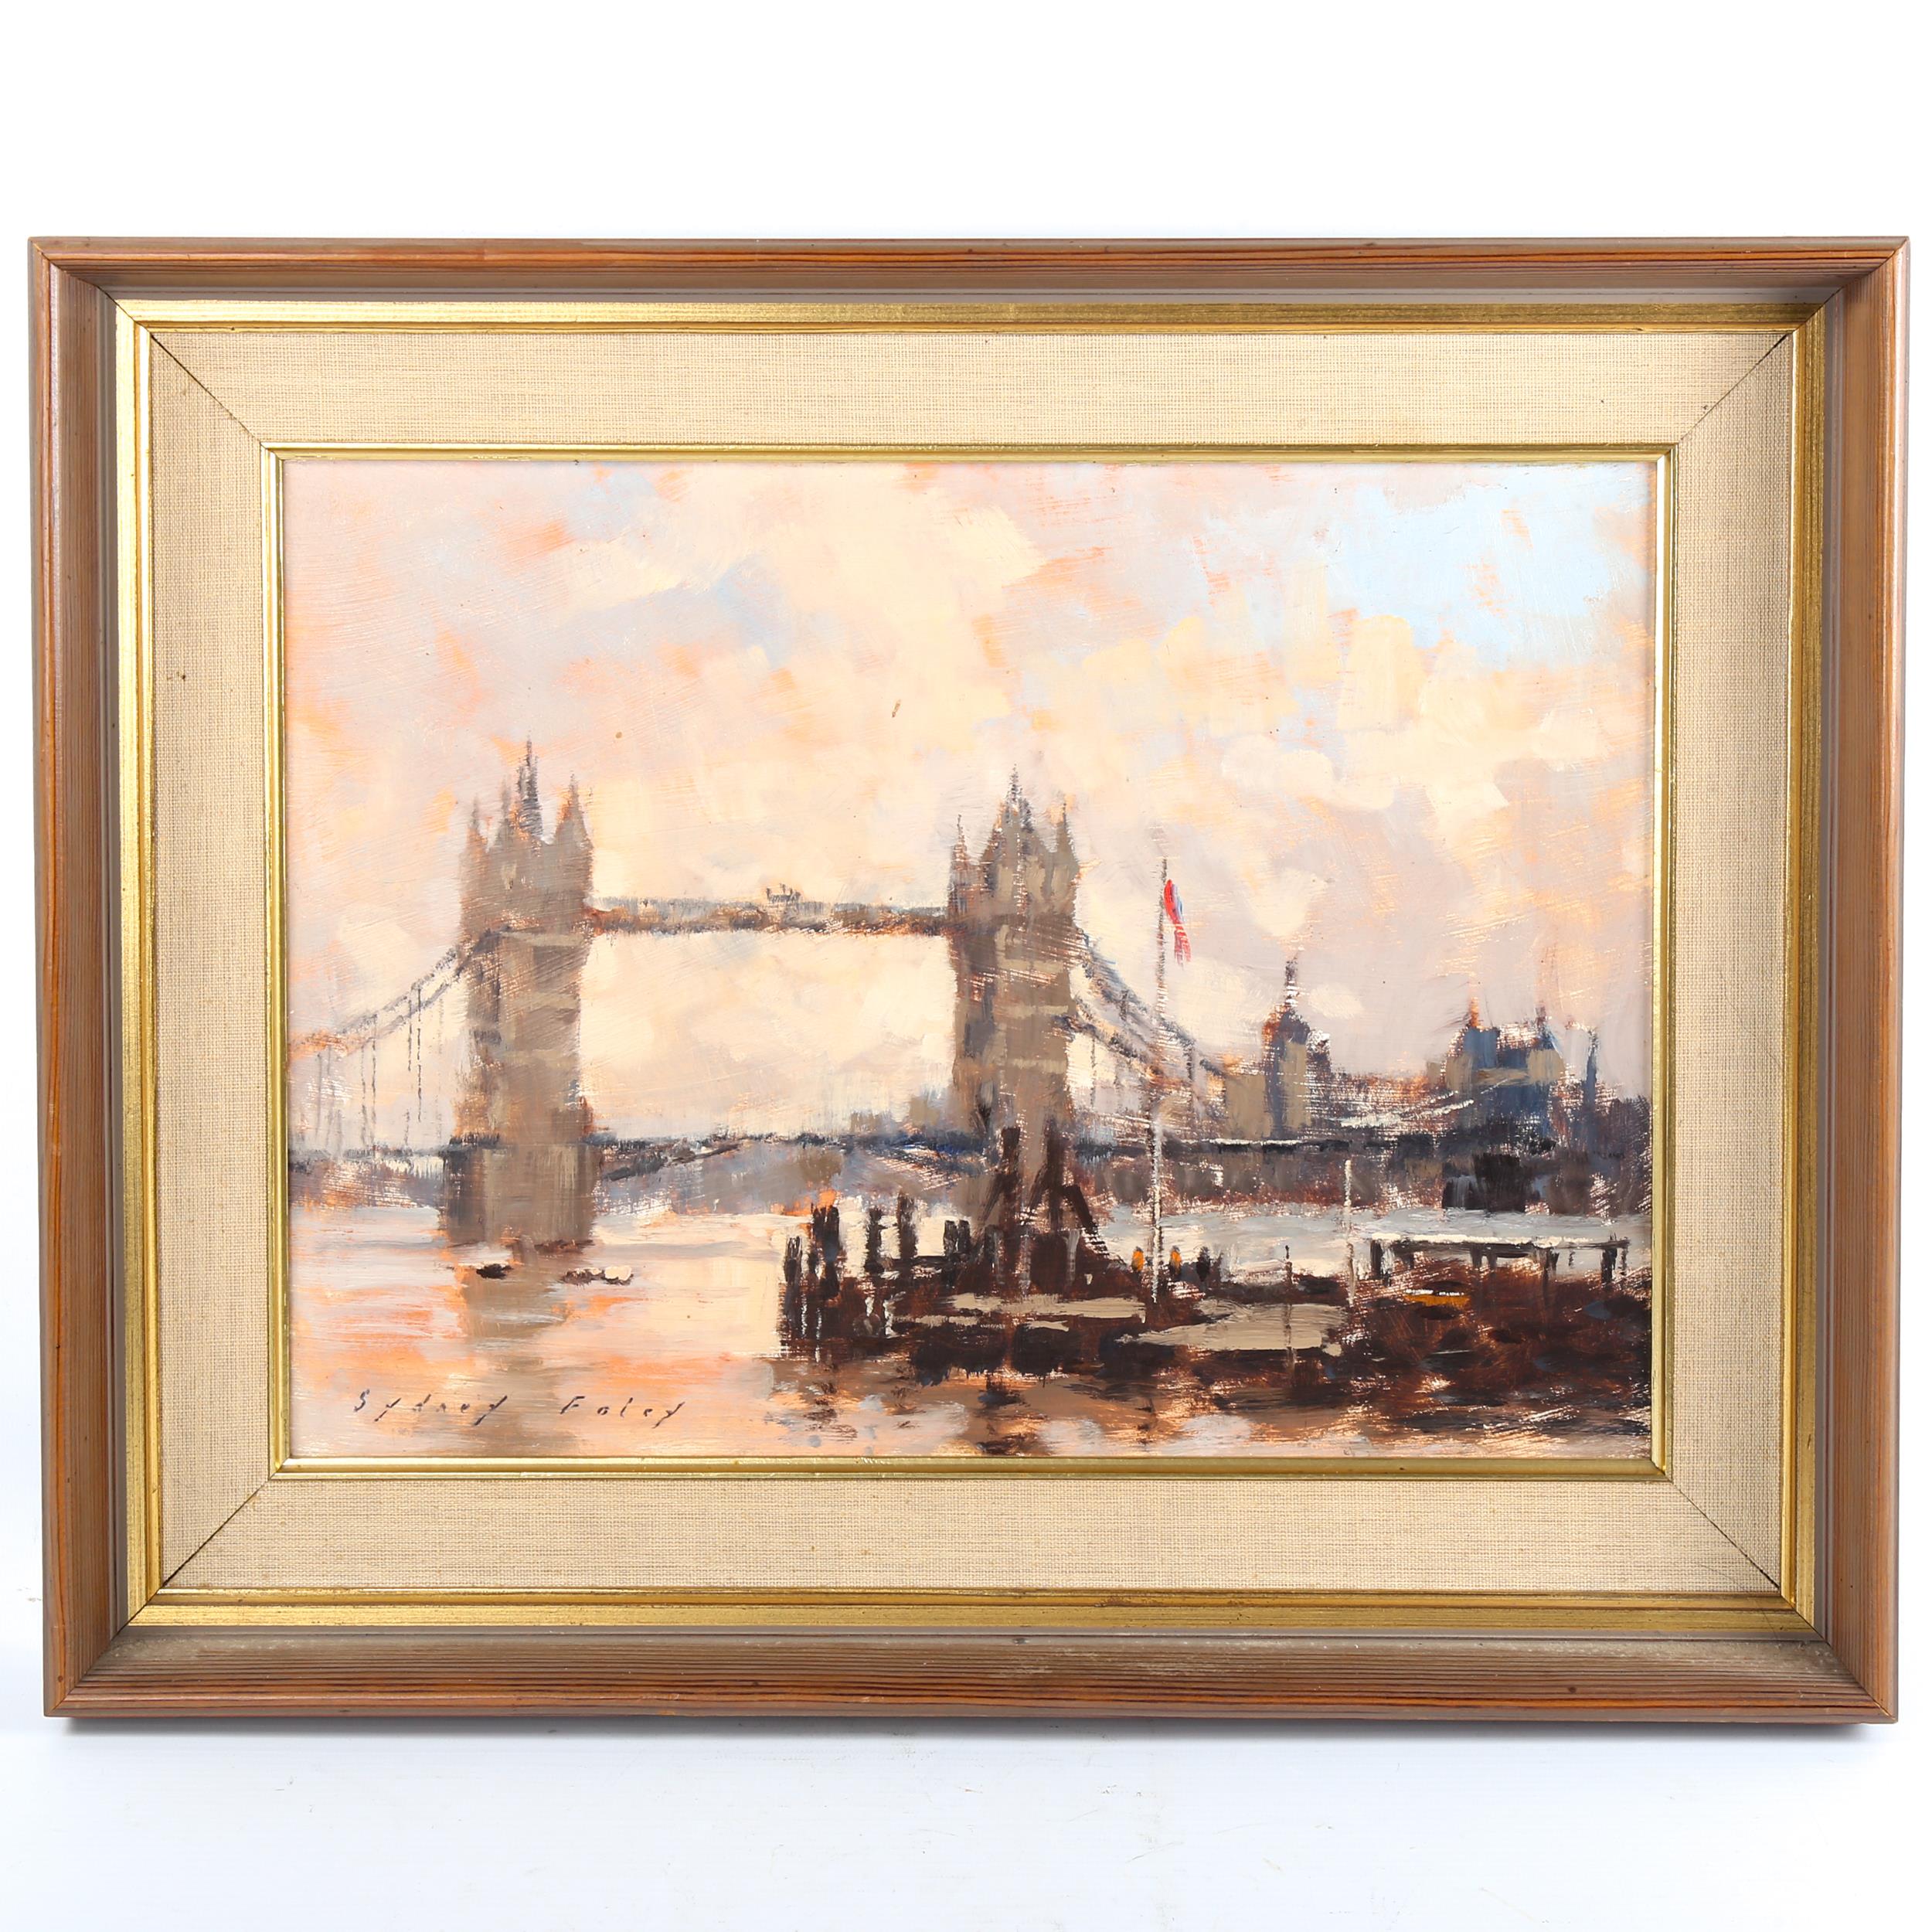 Sydney Foley, oil on board, Morning Light at Tower Bridge, signed with Exhibition label verso,